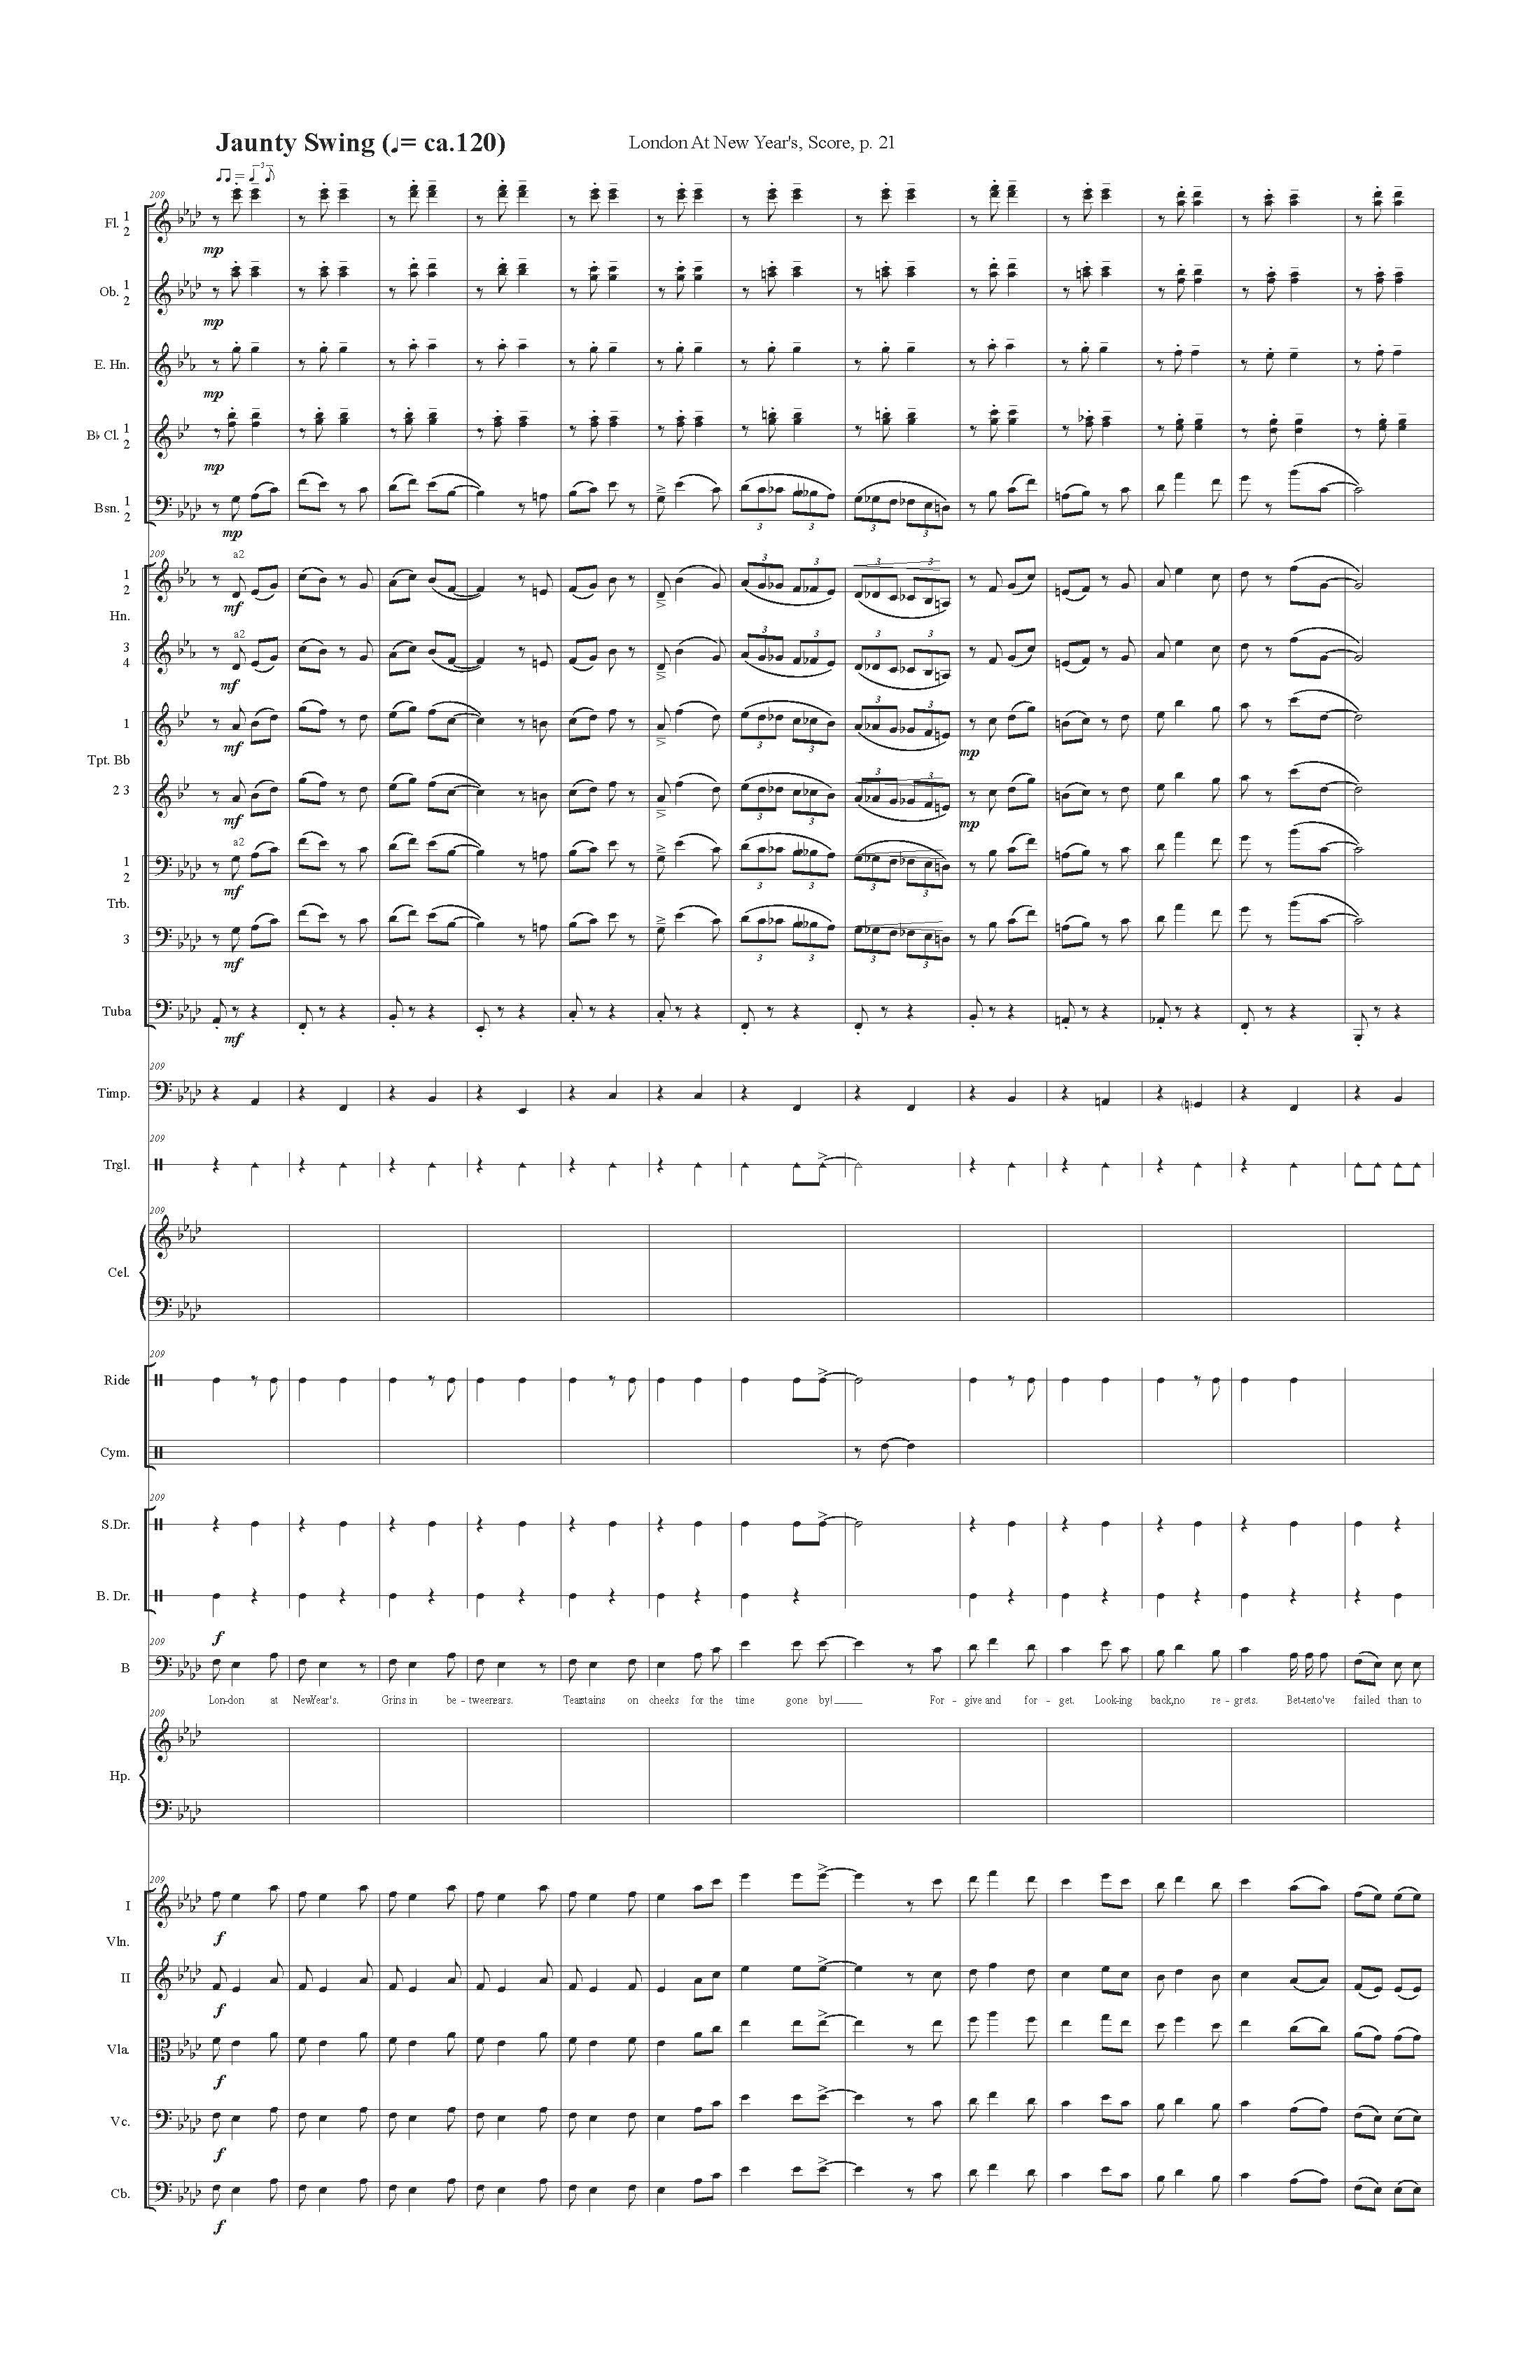 LONDON AT NEW YEARS ORCH - Score_Page_21.jpg